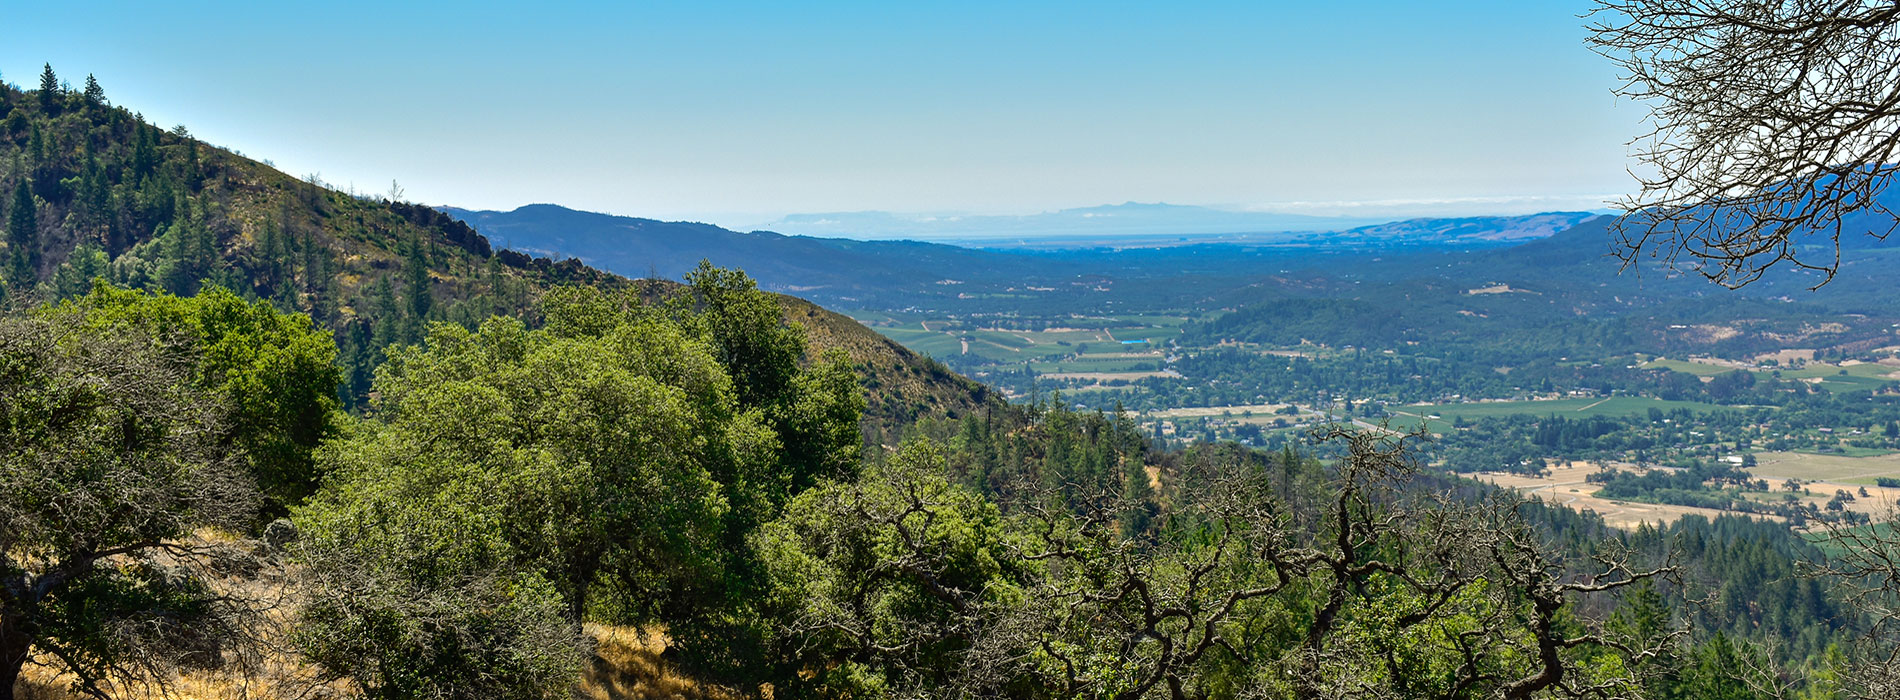 View of Sonoma Valley from the Lawson Trail at Hood Mountain Regional Park and Open Space Preserve